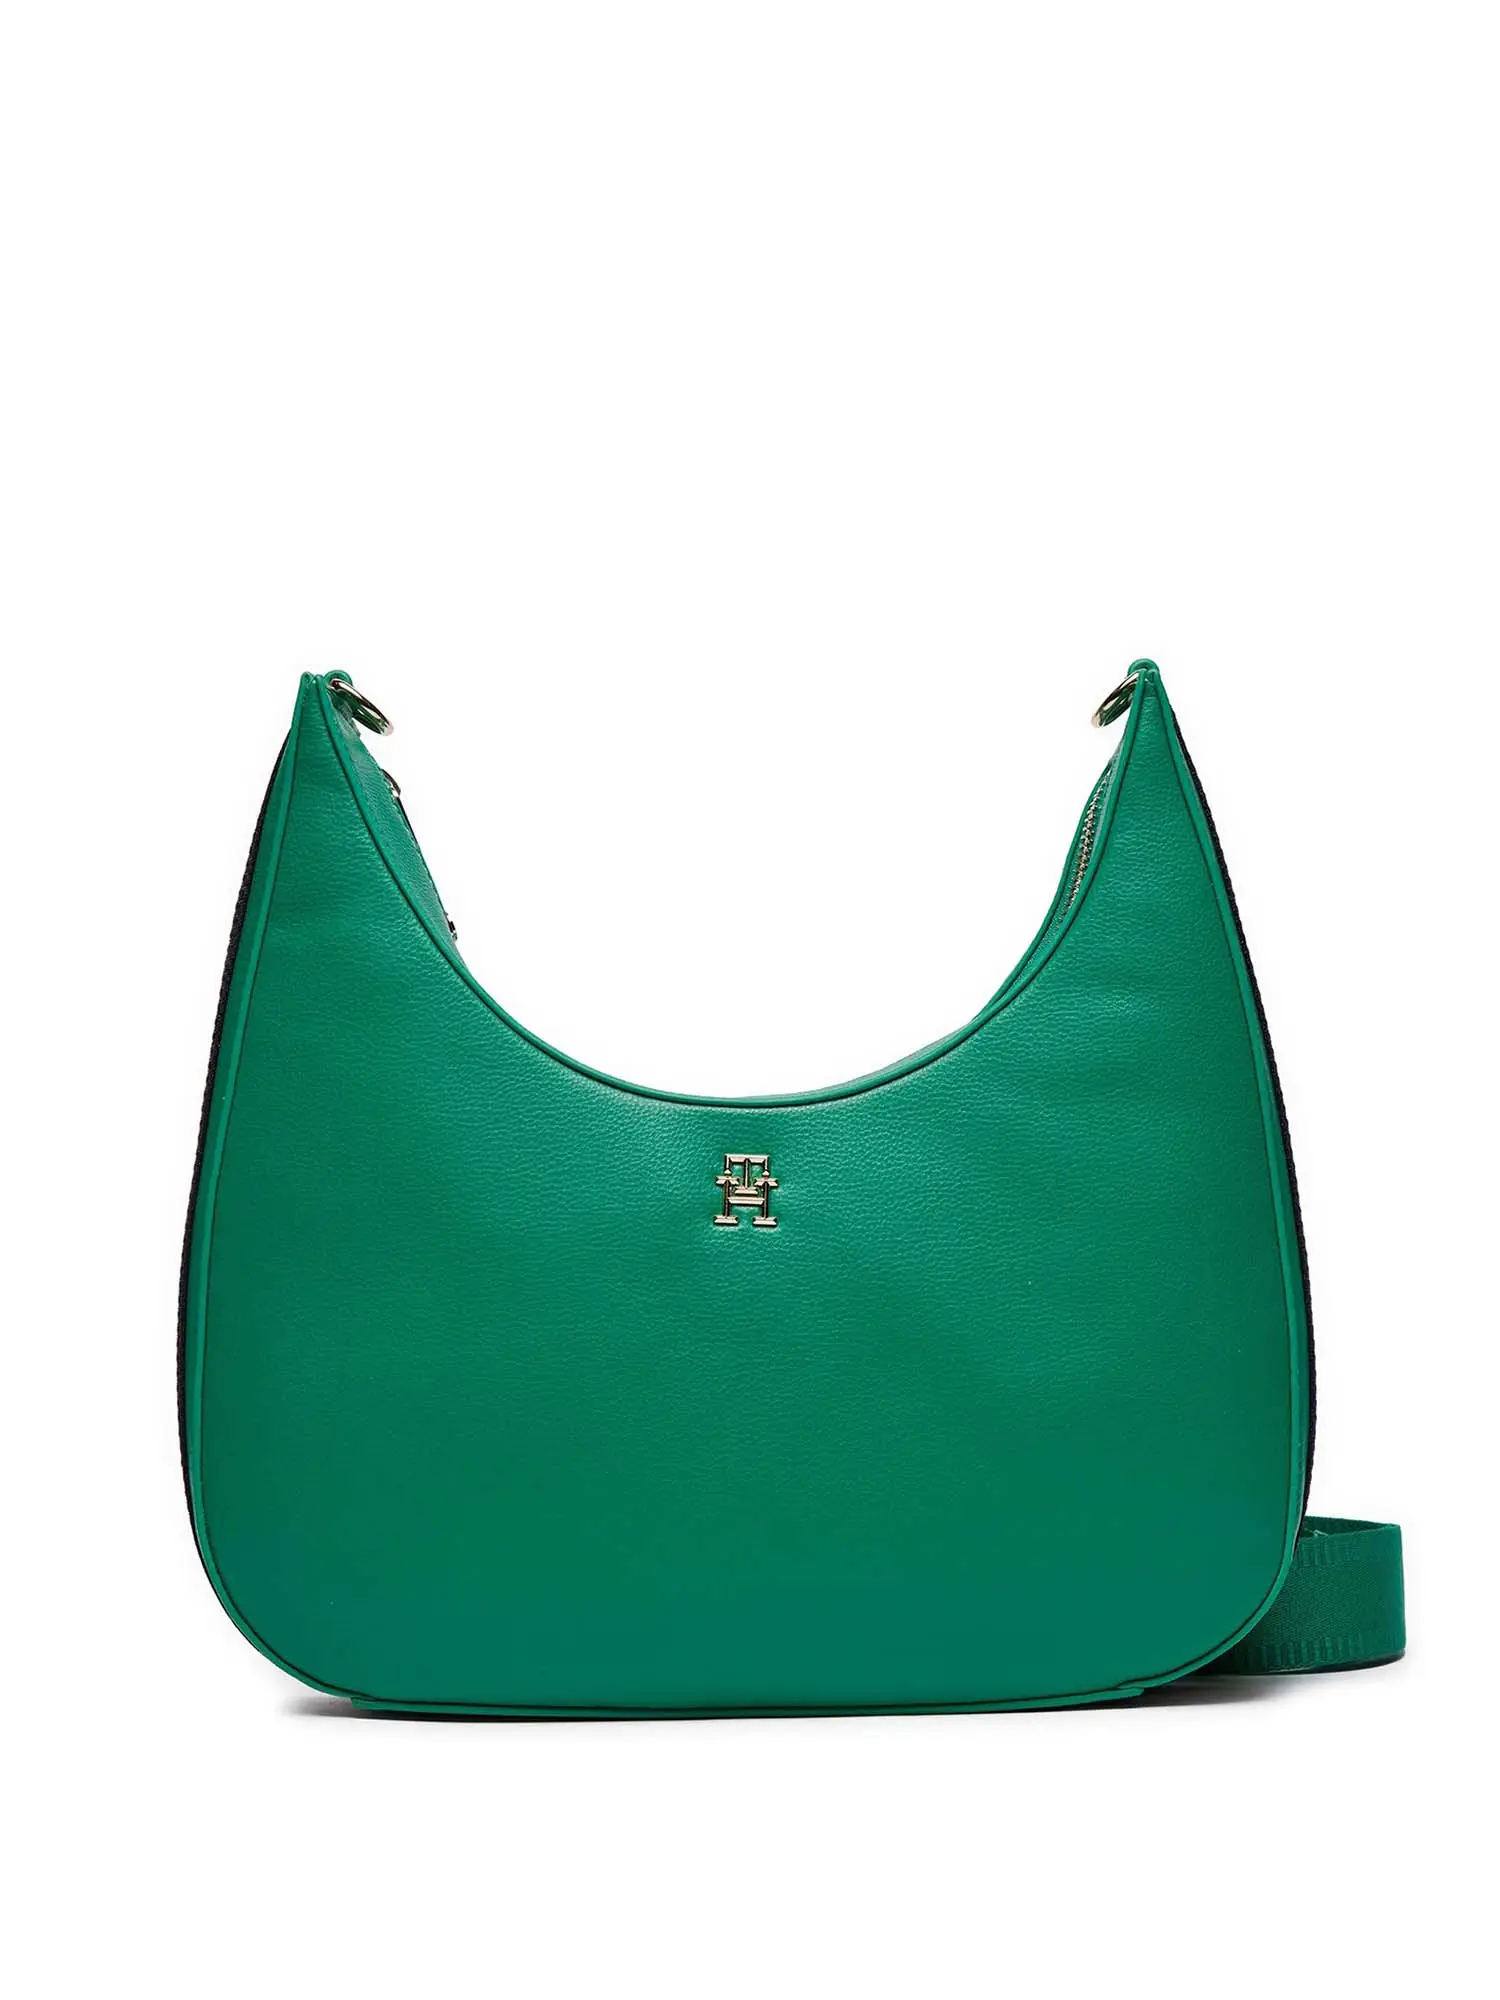 TRACOLLA DONNA - TOMMY HILFIGER - AW0AW16088 - VERDE, UNICA